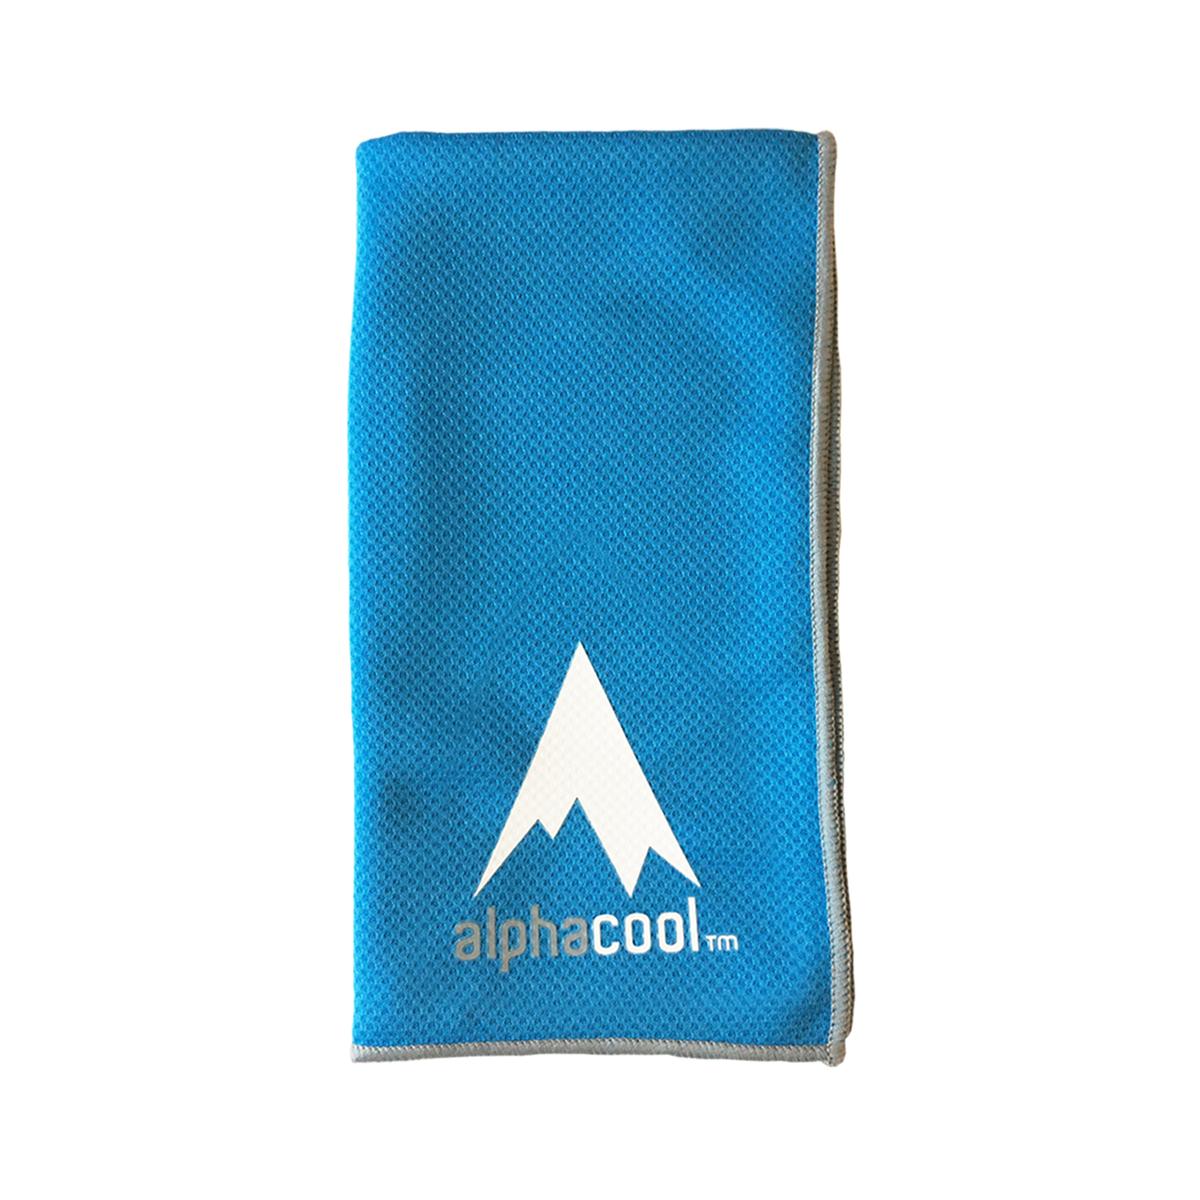 AlphaCool Mesh Instant Cooling Towel